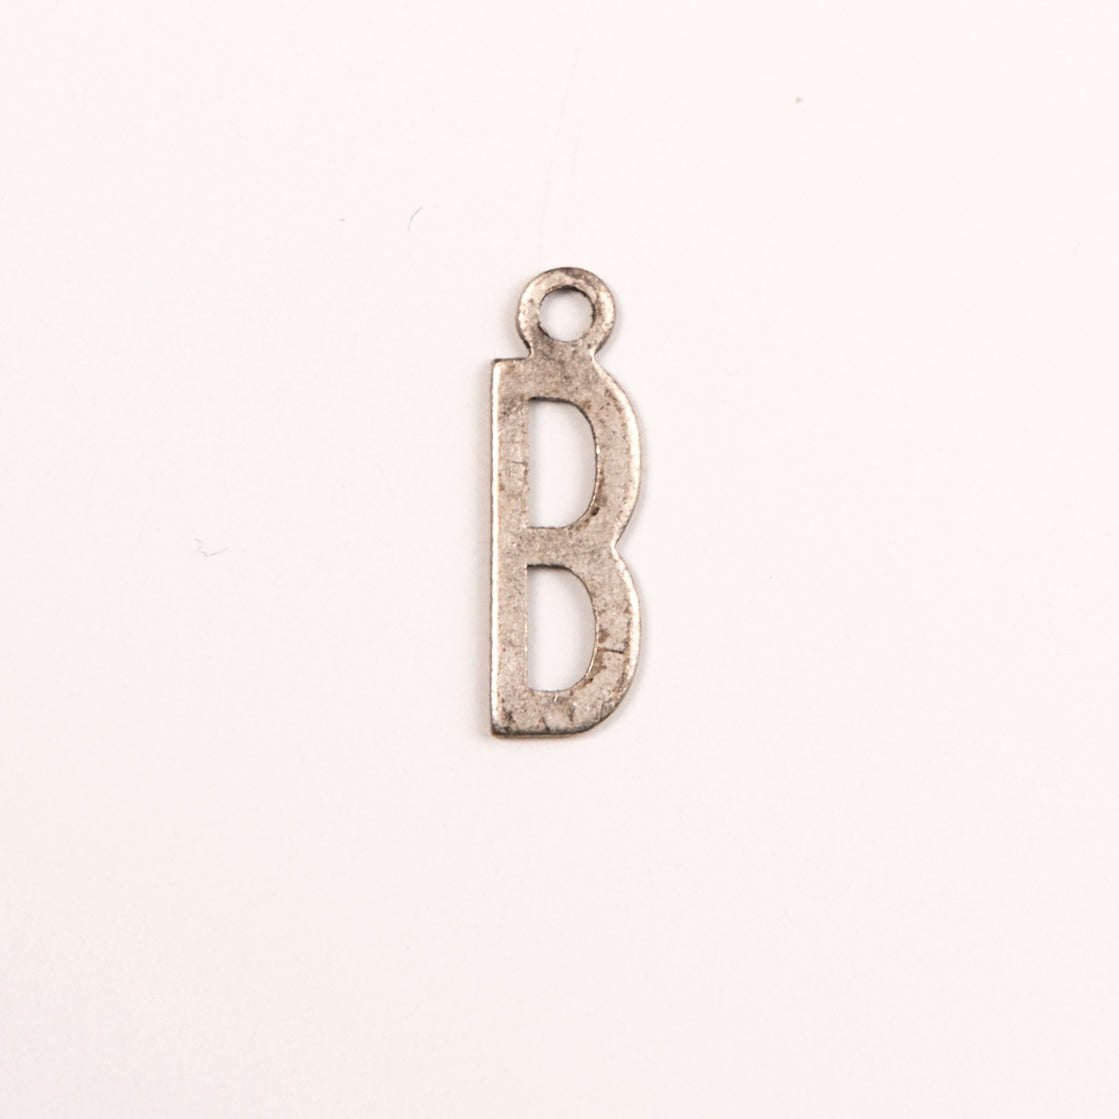 15x6mm "B" Letter Charm, Antique Gold, Classic Silver, Antique Silver Metal Stamping, pk/6